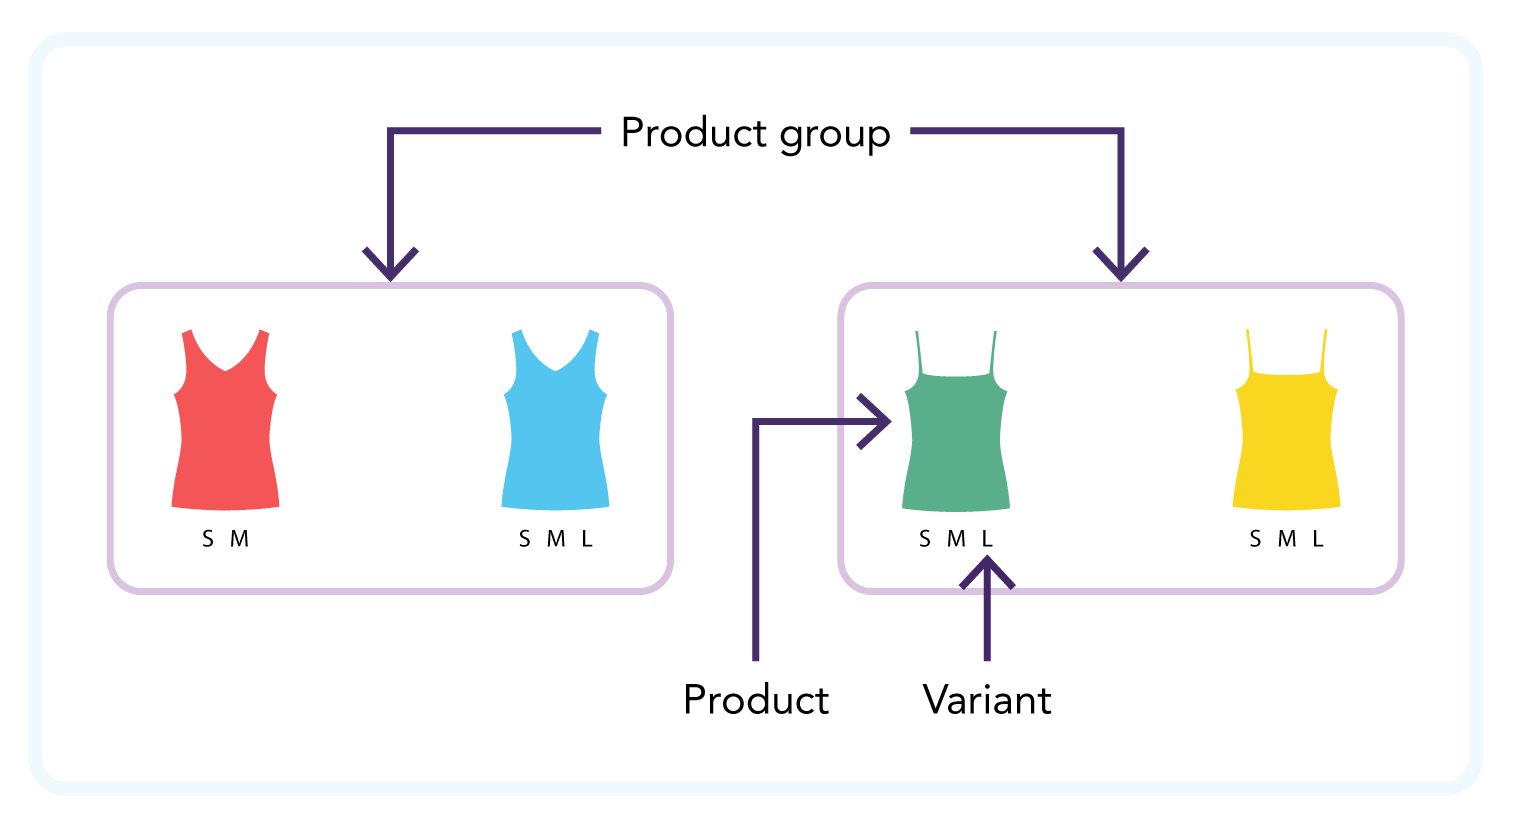 Data model concept - product groups, products, and variants